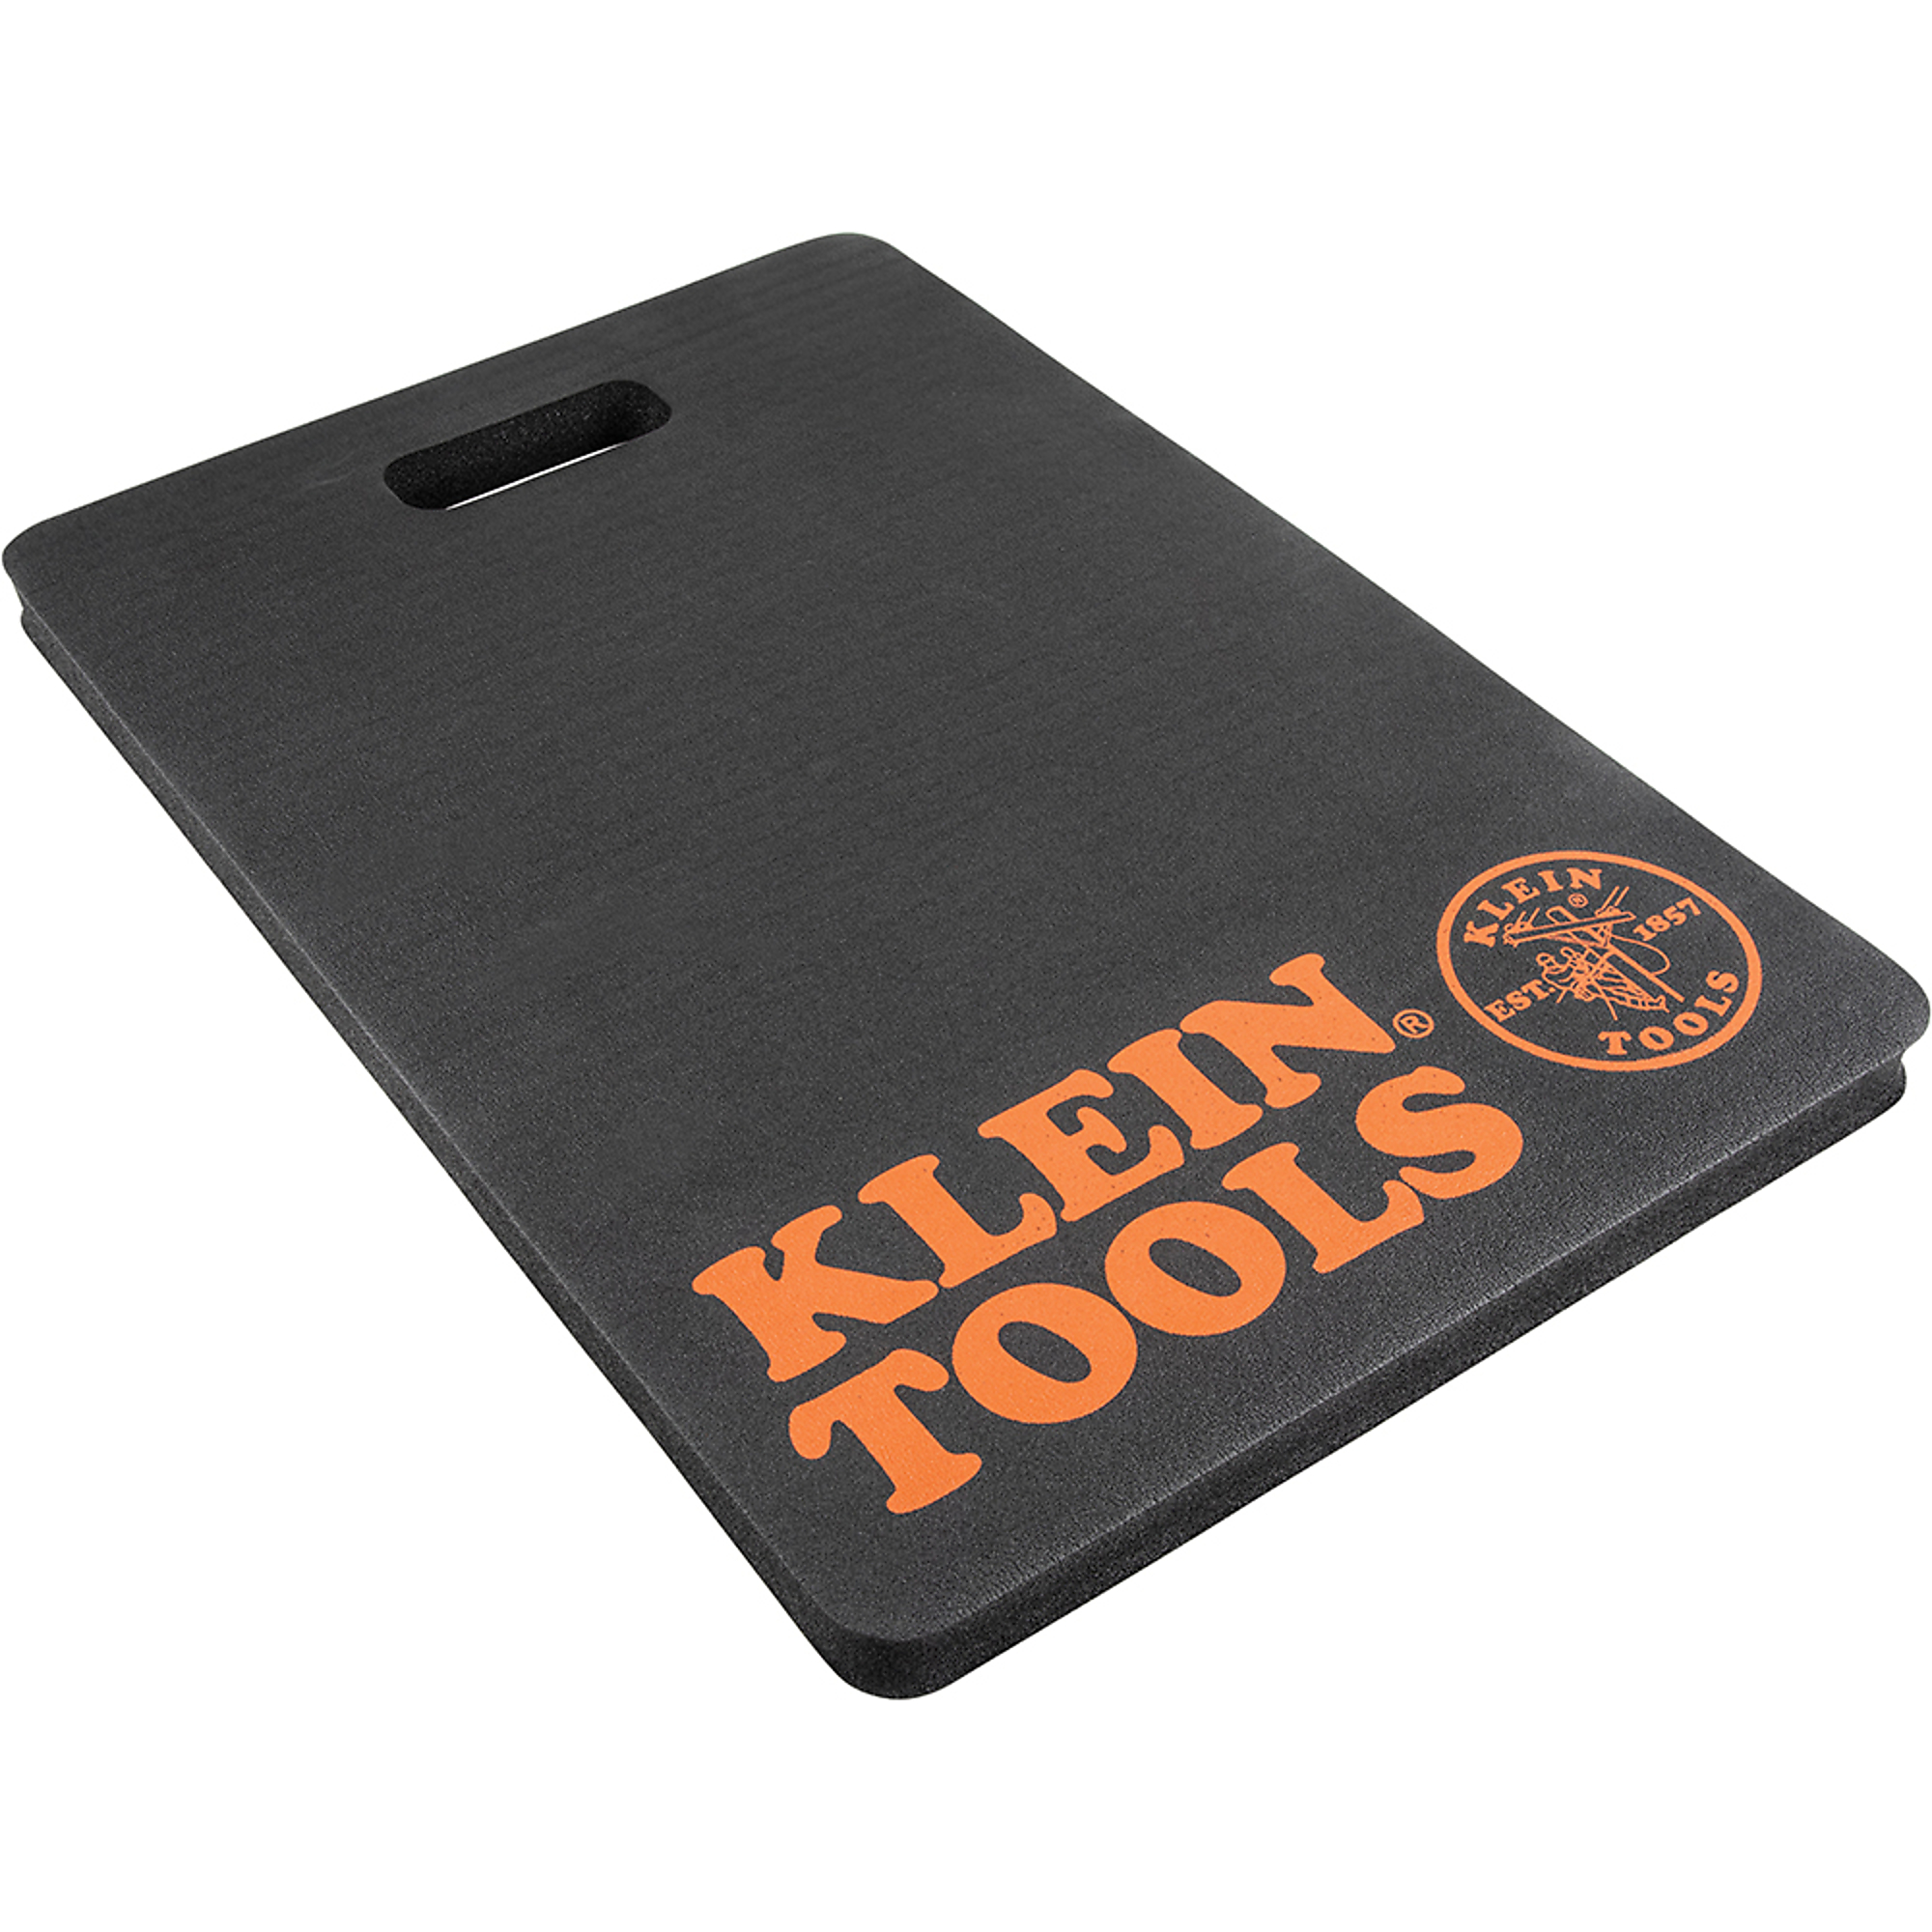 Klein Tools Tradesman Pro , Professional Kneeling Pads, Width 1 in, Length 21 in, Thickness 1 in, Model 60135